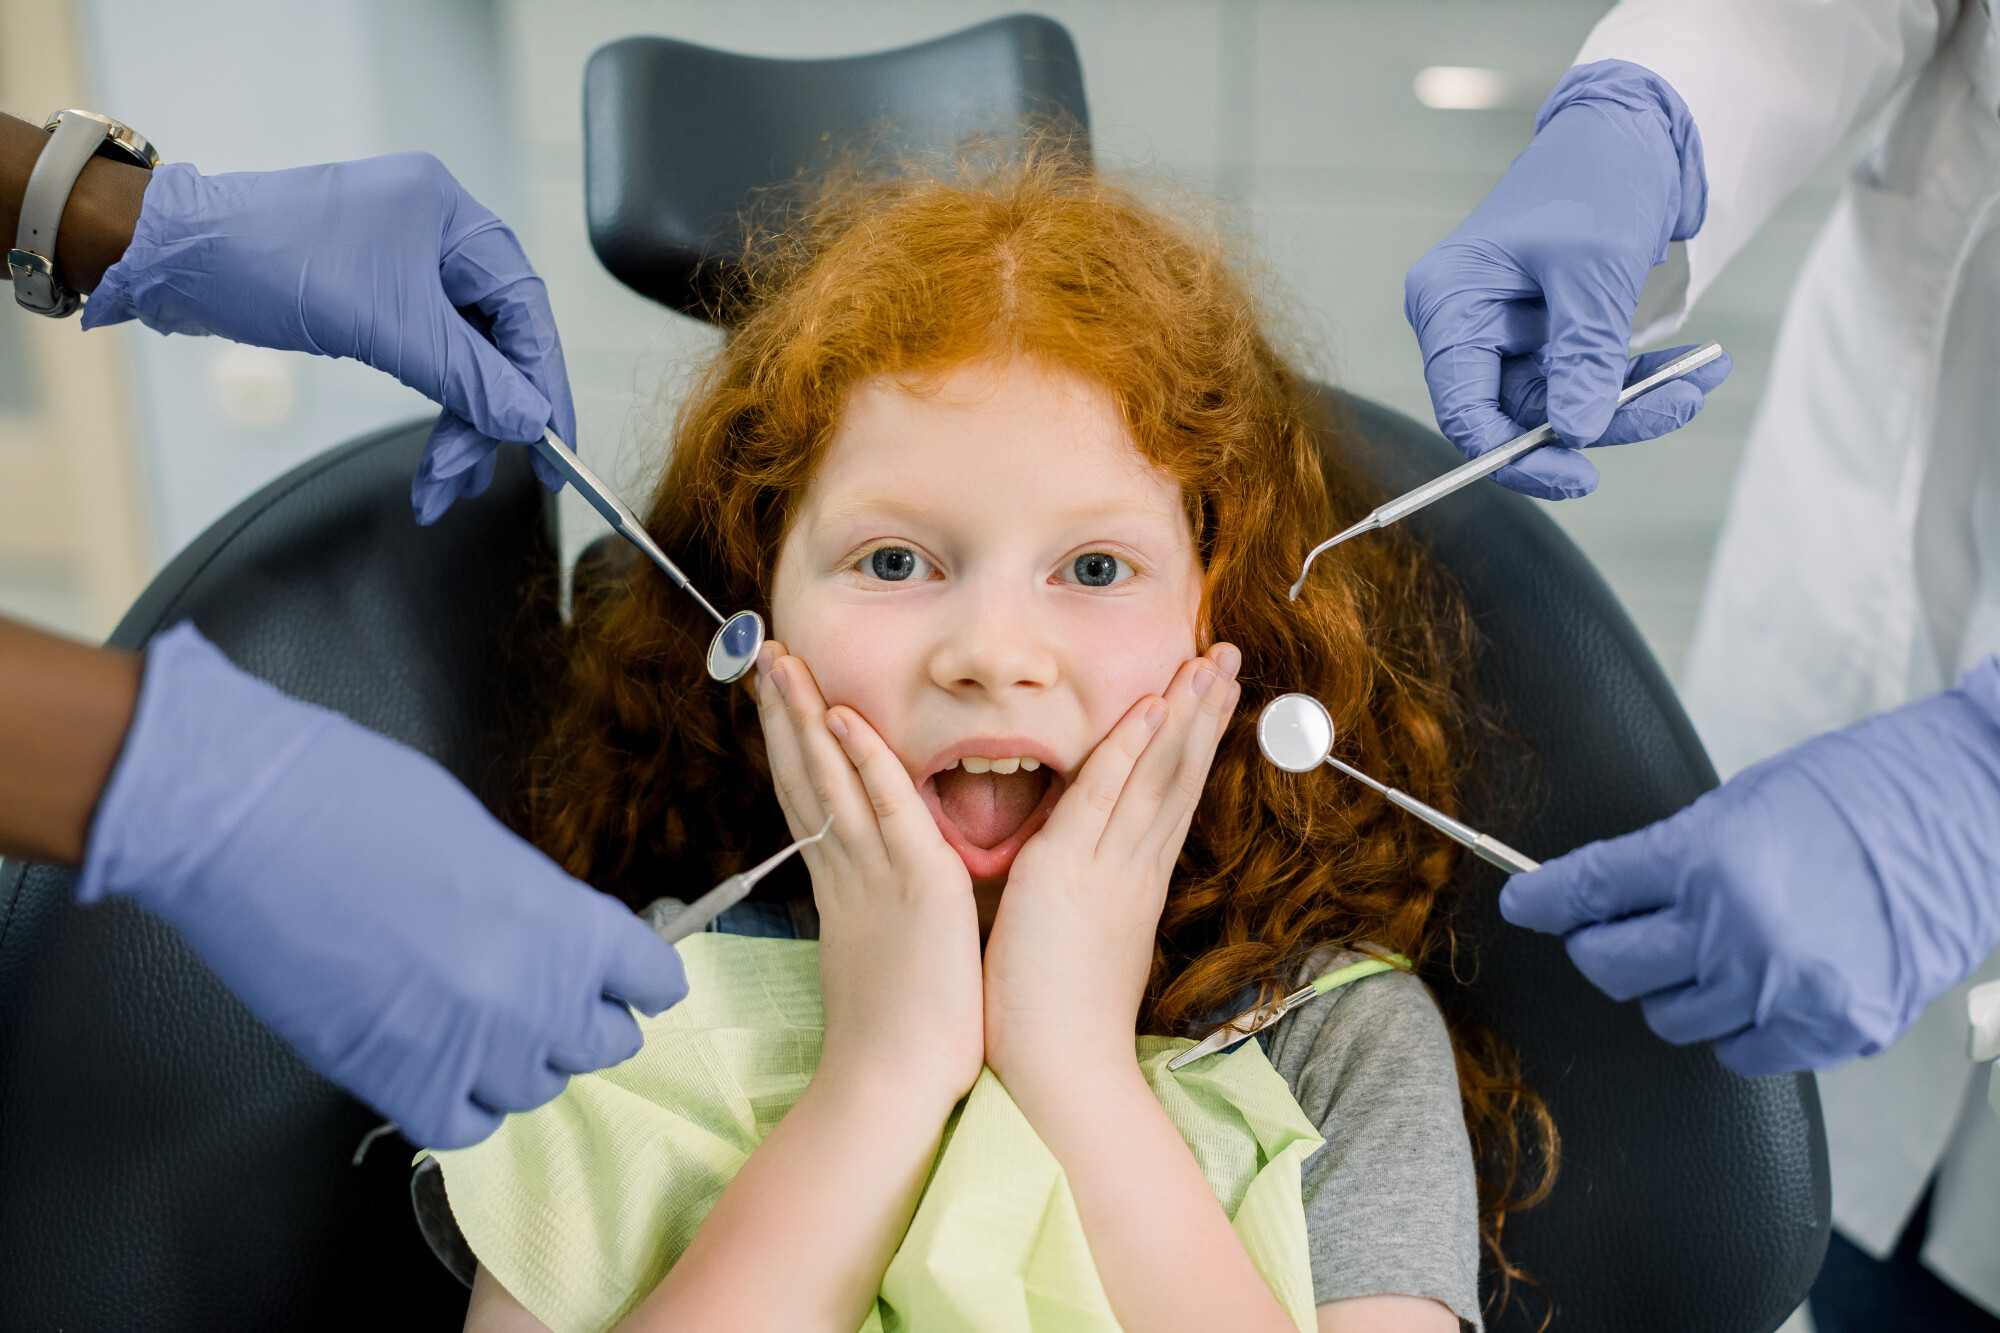 Are you on the search for a new pediatric dentist for your child? This is how to choose a dentist that will best fit your little one's needs.